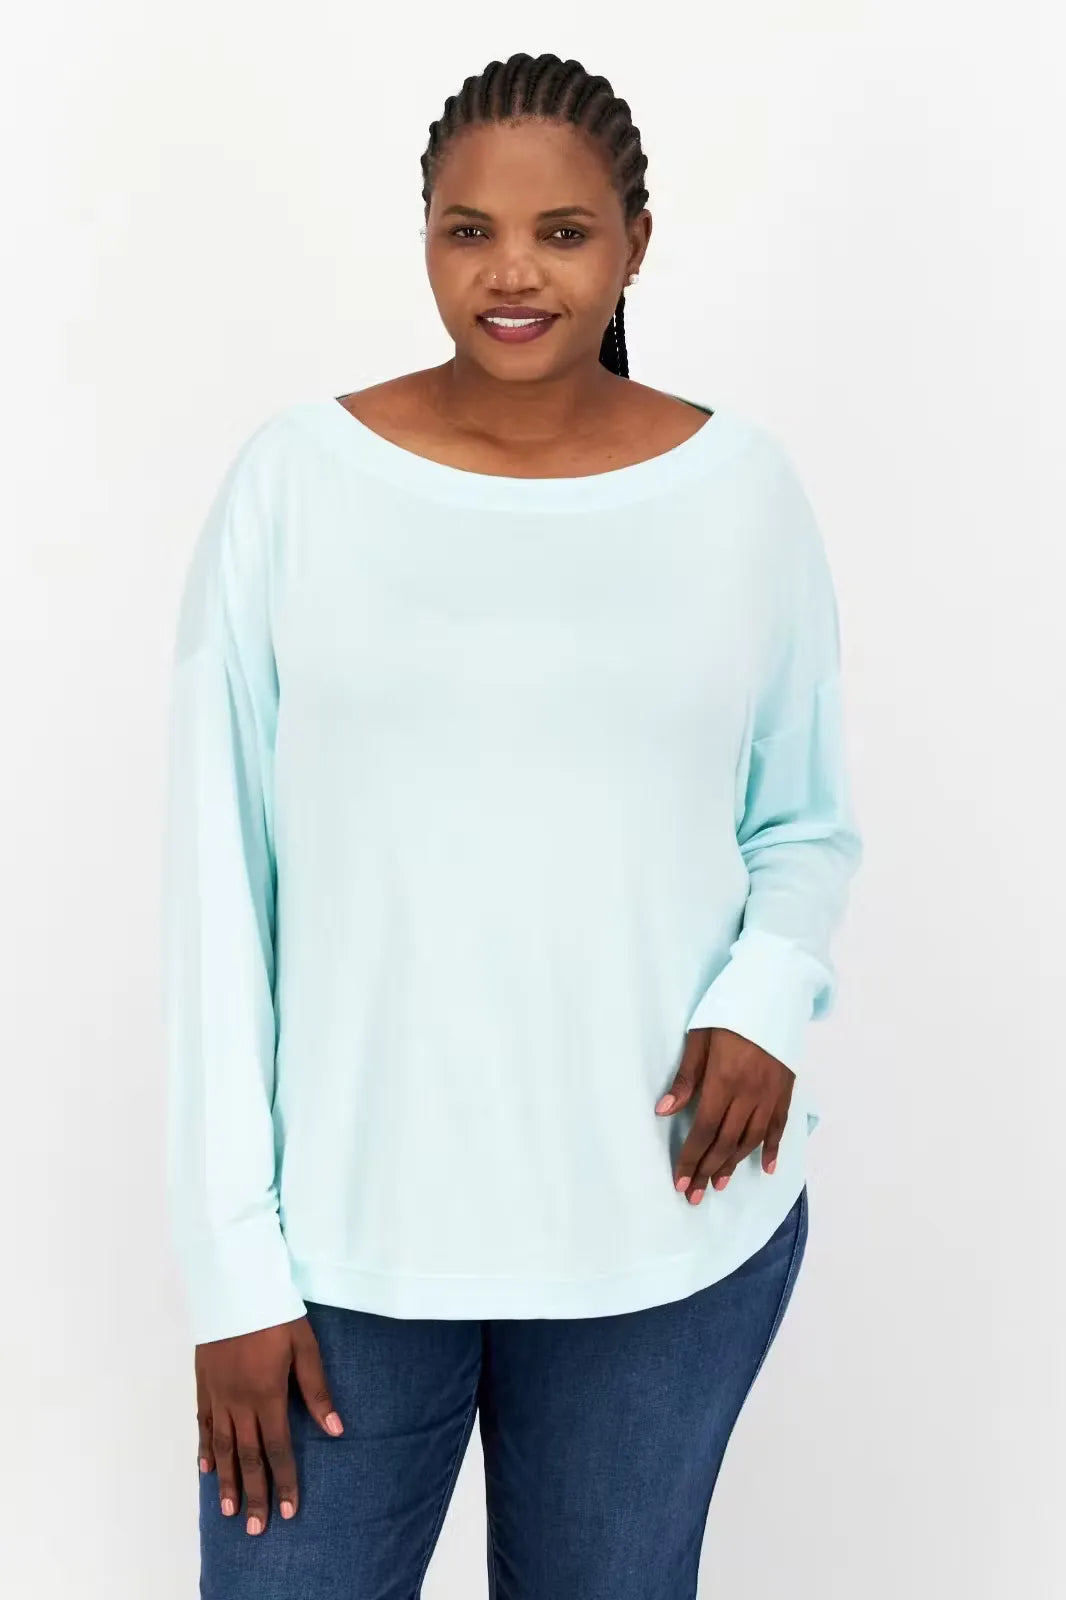 Aqua green, long-sleeve crewneck pullover top made from soft, modal fabric. Model wearing the top with relaxed fit and thumbhole cuffs.